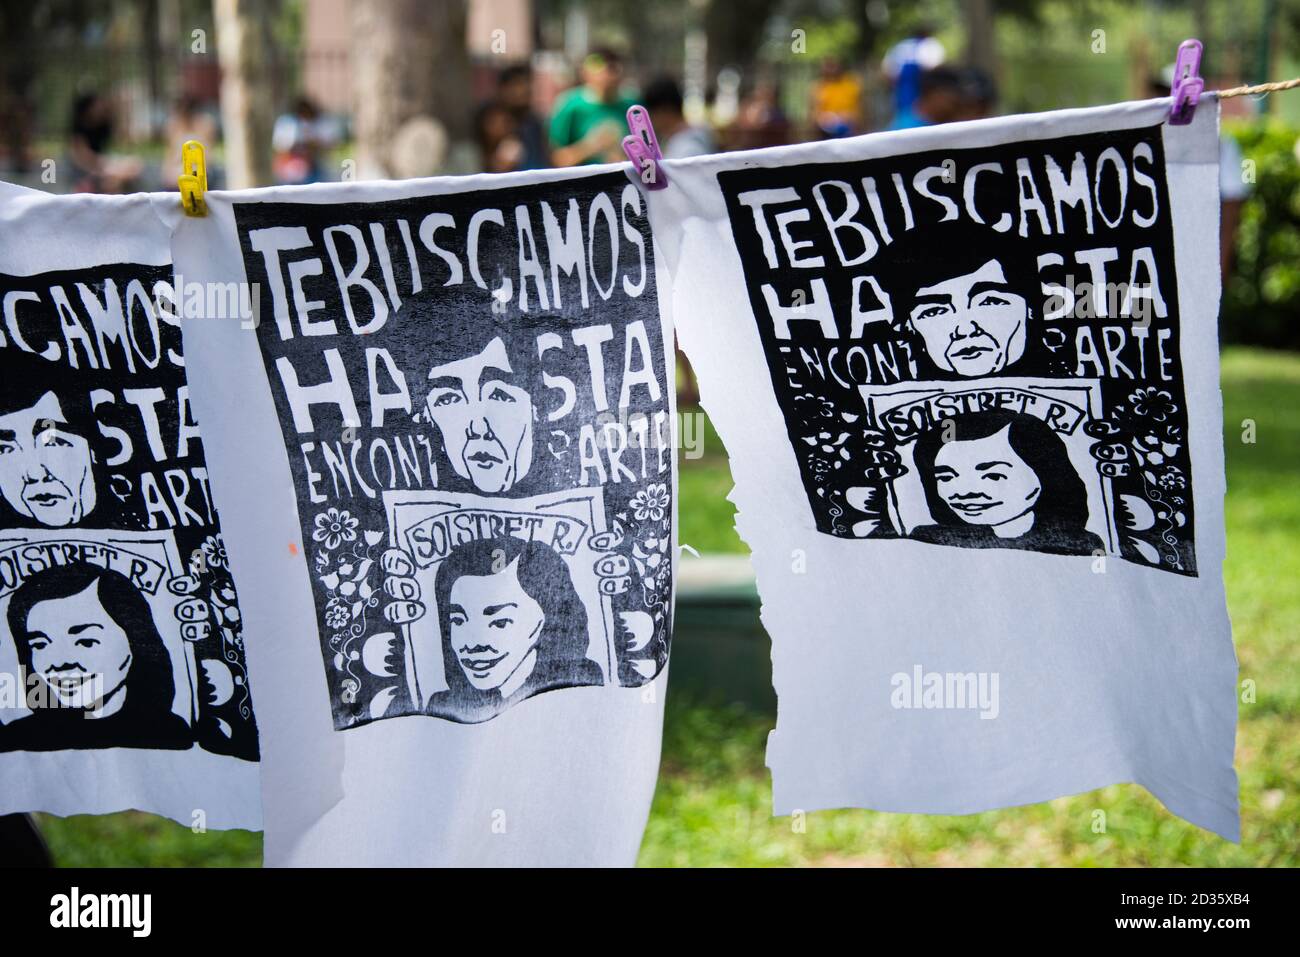 We will search until we find you -silk screen printed fabric at an International Womens day march in Lima, Peru Stock Photo